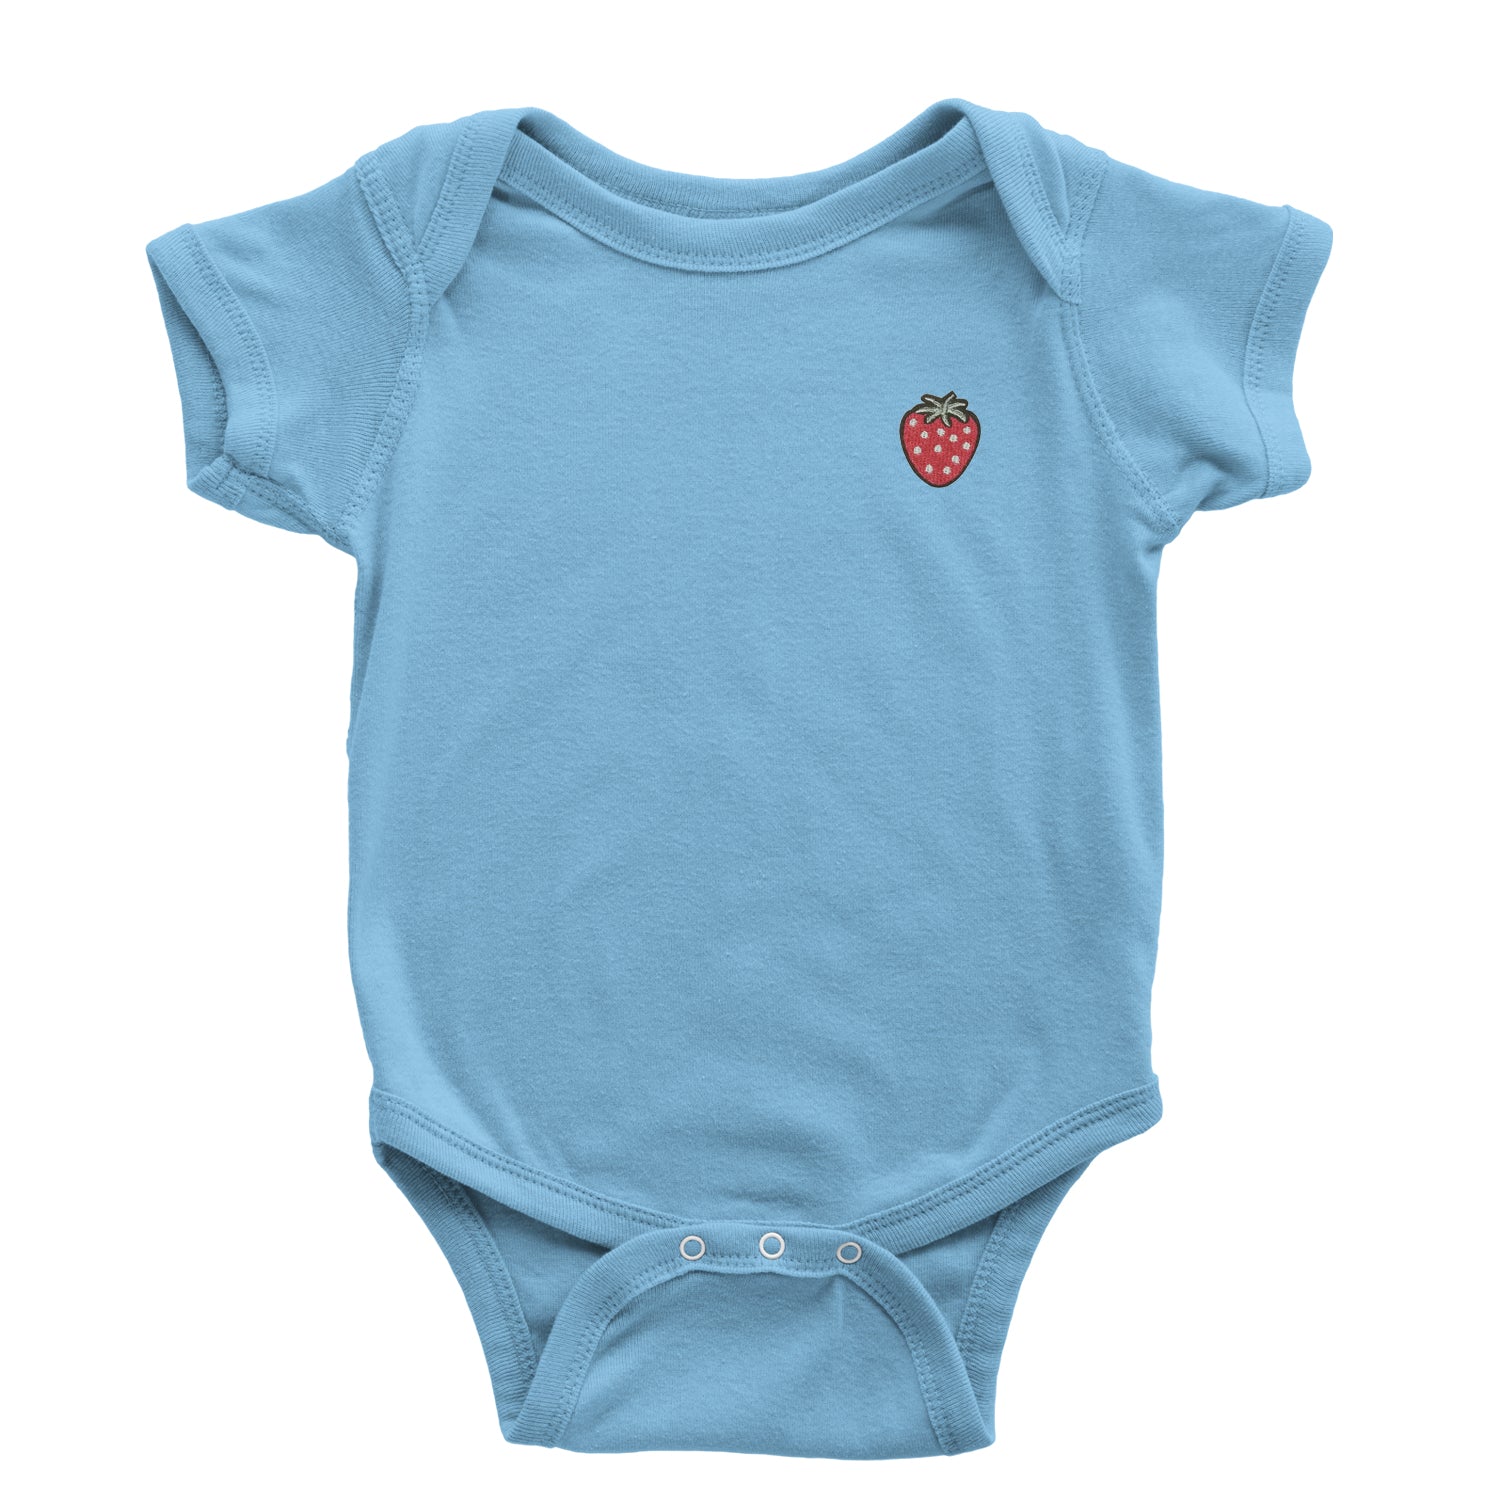 Embroidered Strawberry Patch (Pocket Print) Infant One-Piece Romper Bodysuit and Toddler T-shirt fruit, strawberries by Expression Tees